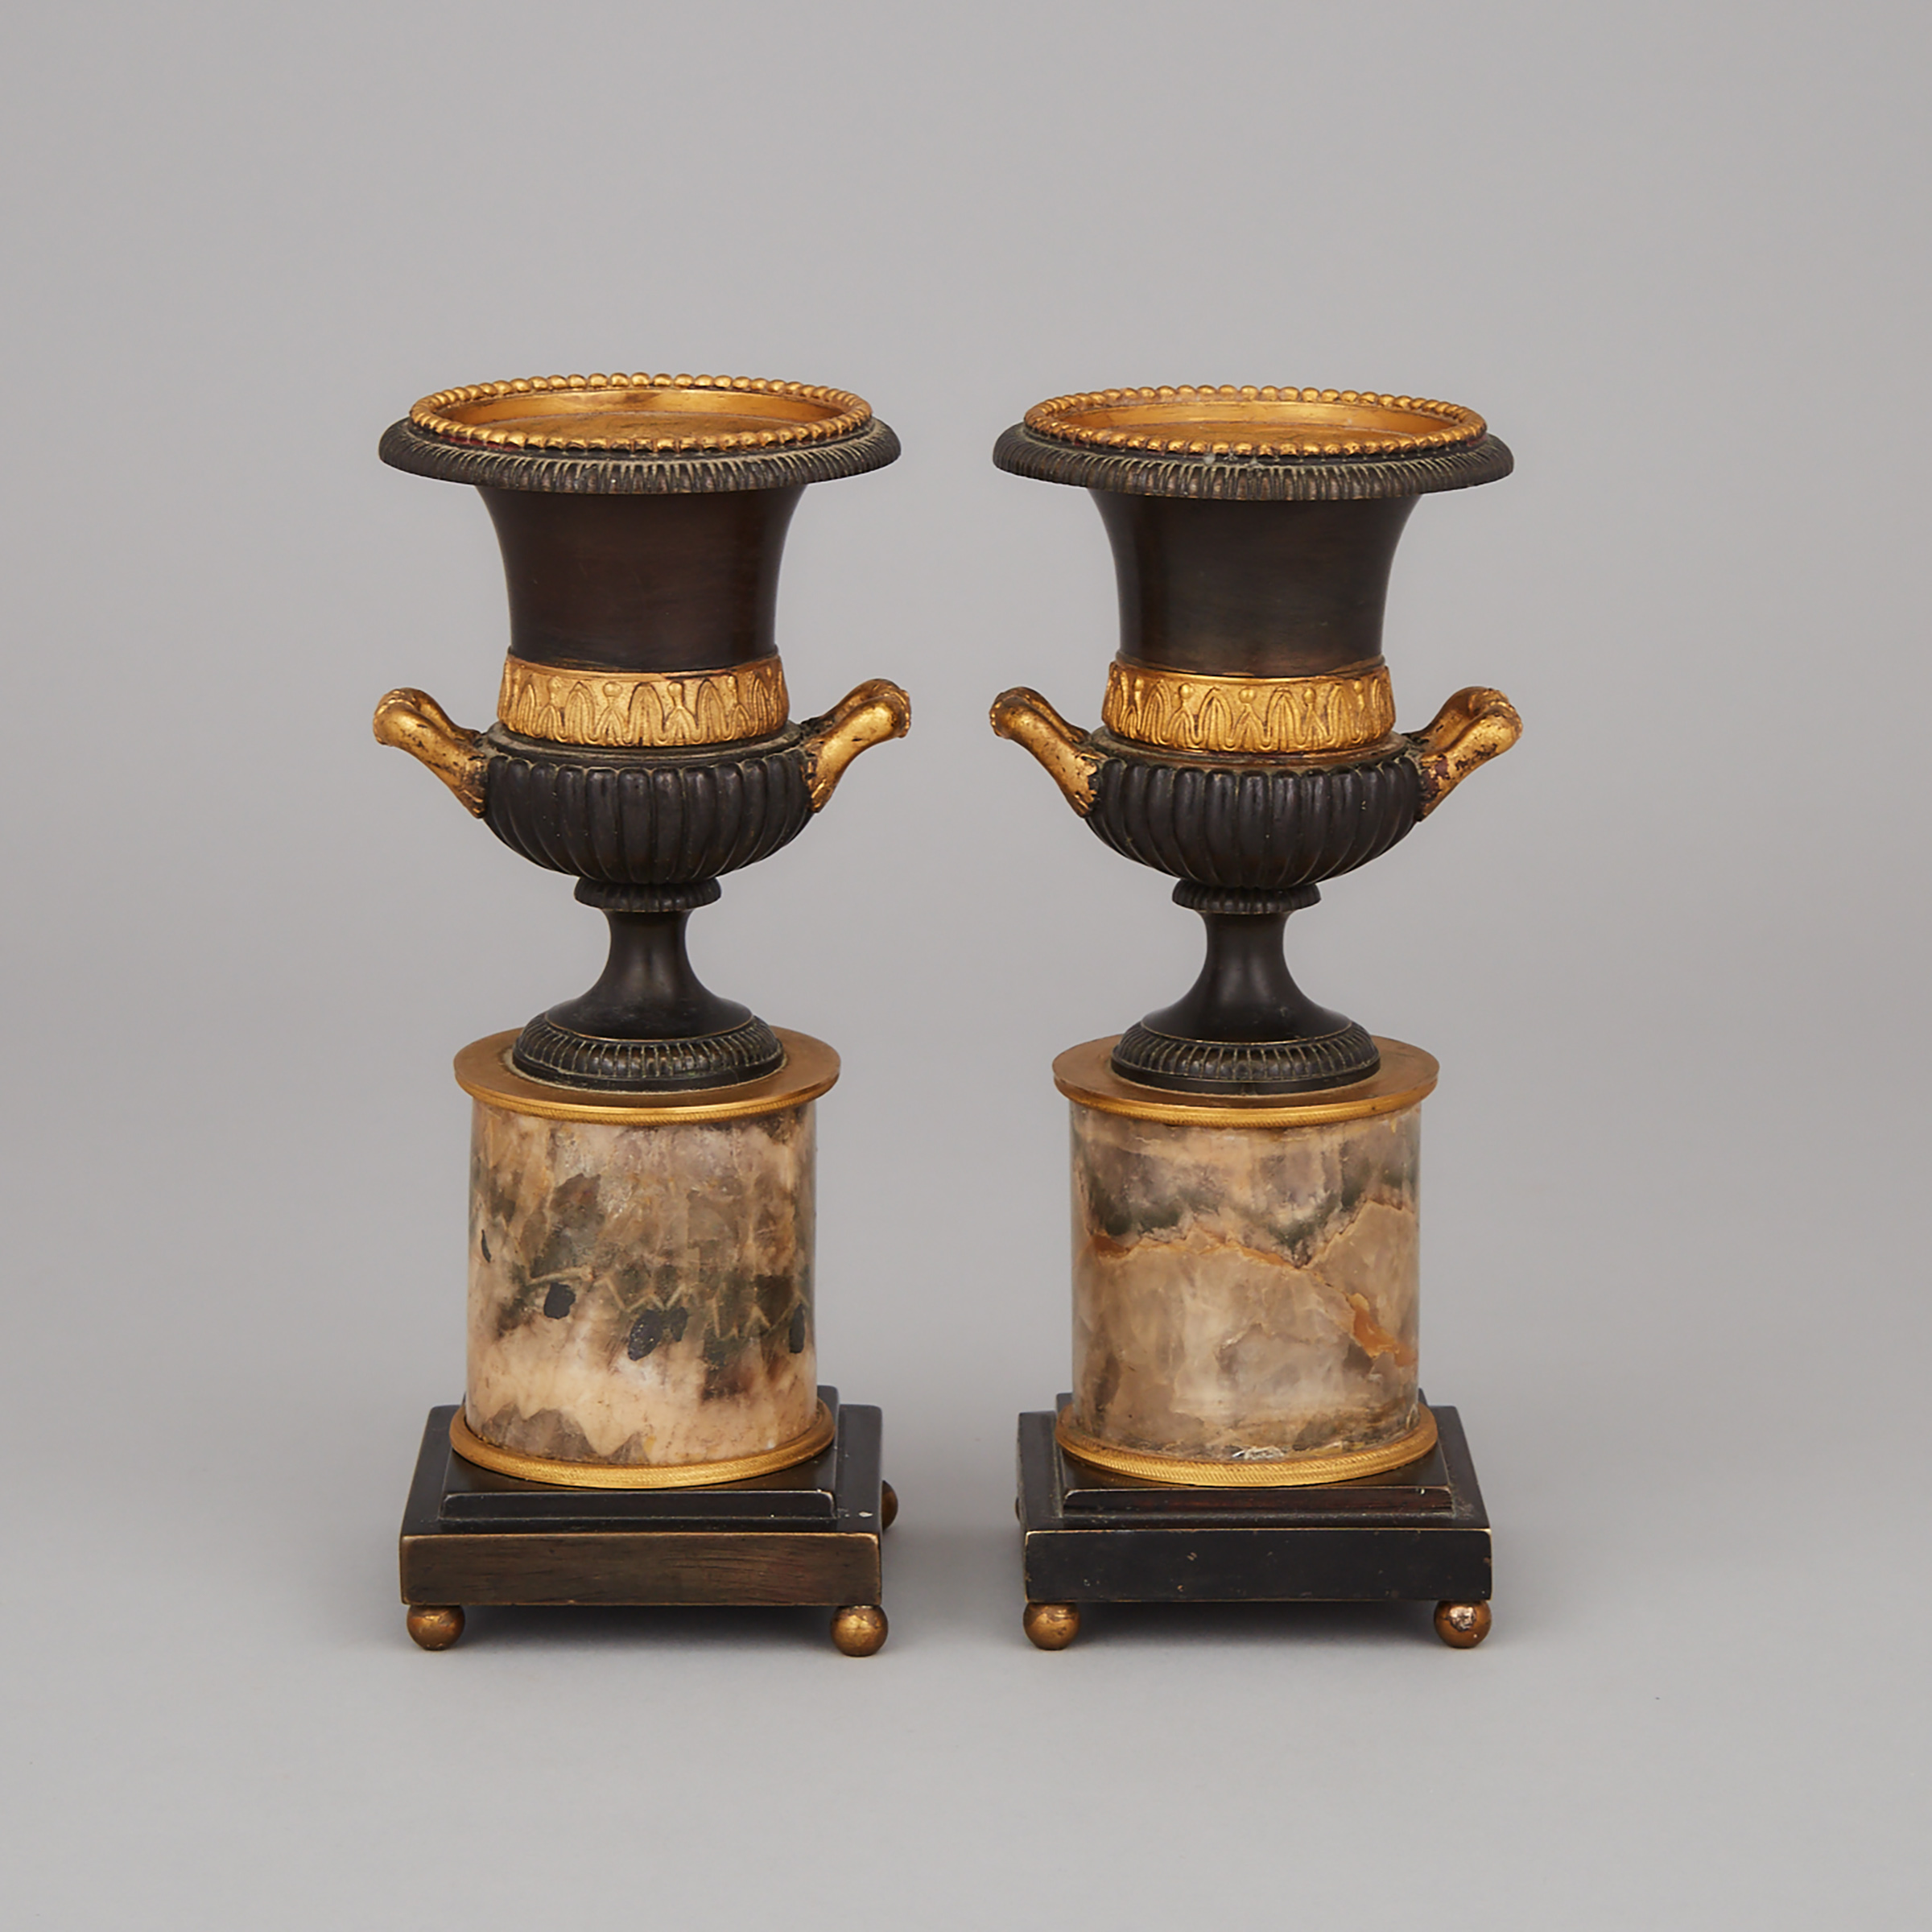 Pair of Regency Neoclassical Gilt and Patinated Bronze Mantle Urns, early-mid 19th century